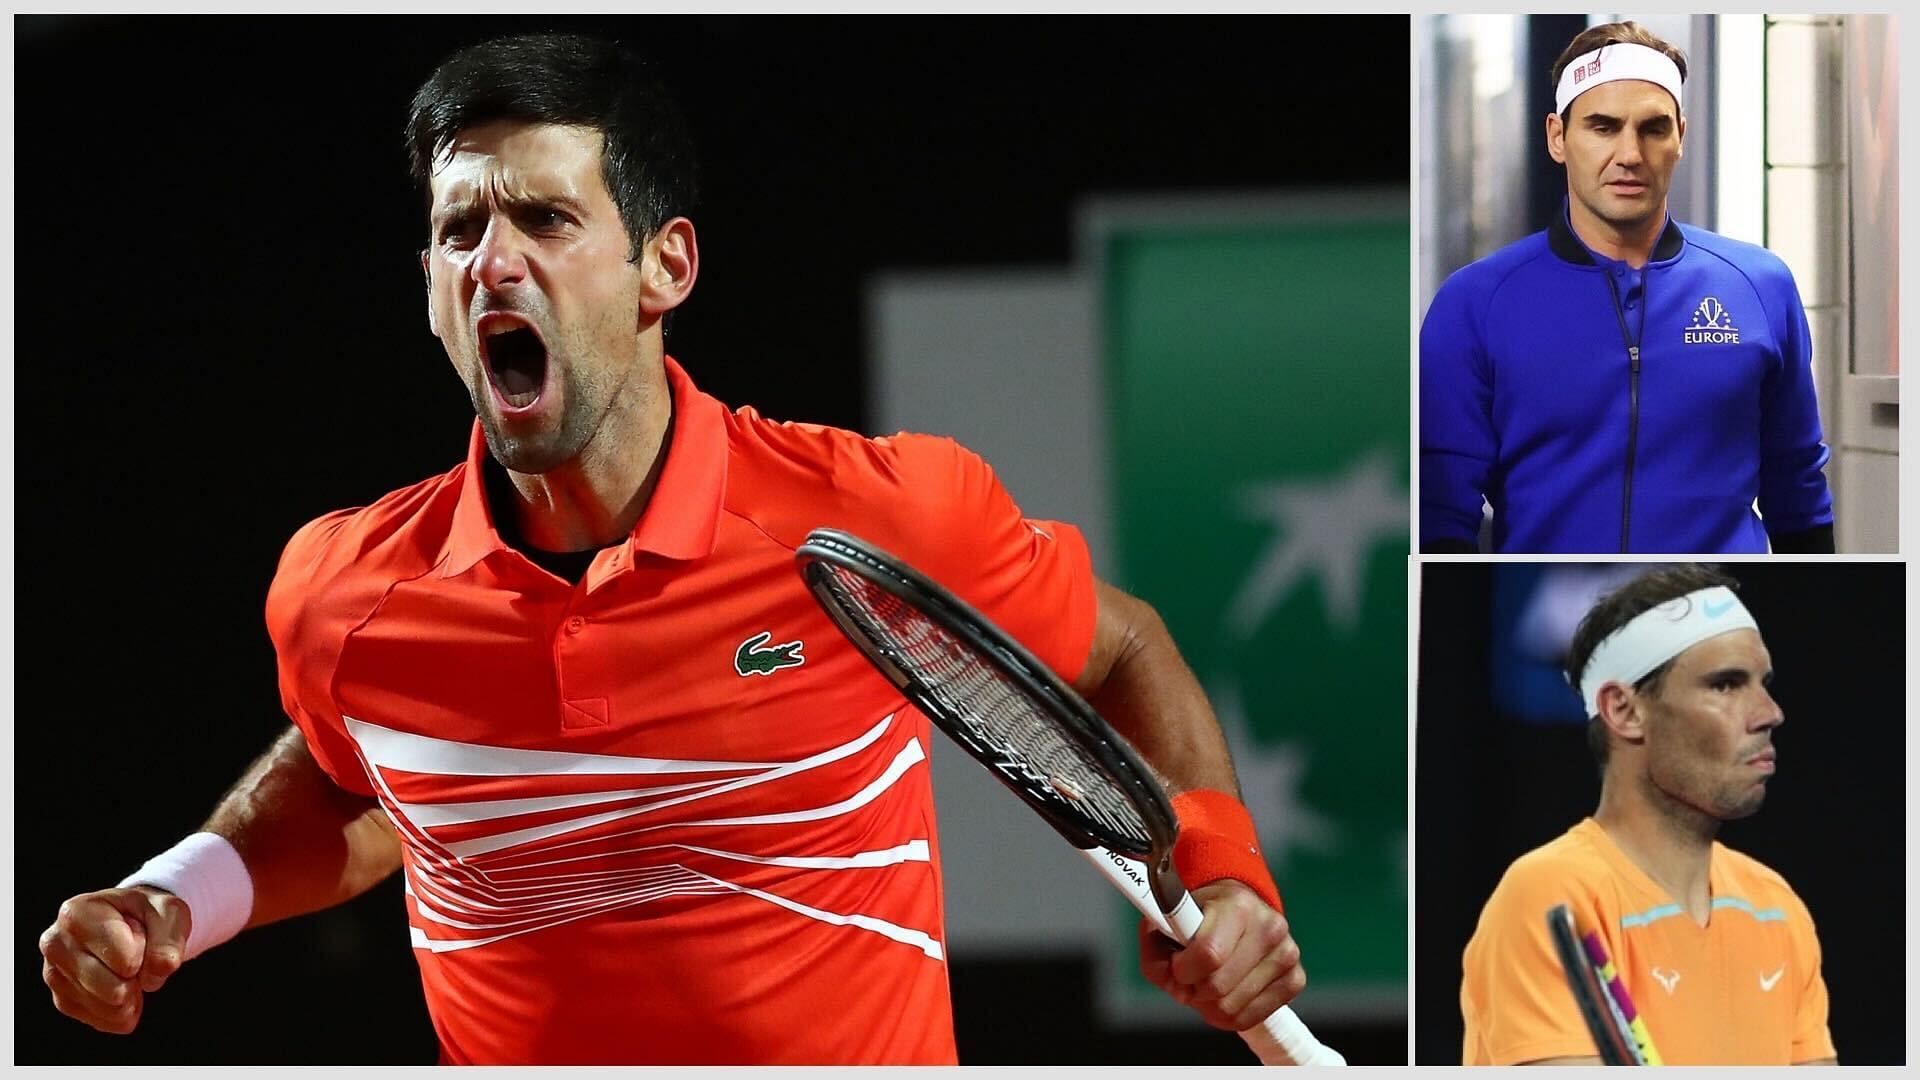 Djokovic secures year-end top ranking for a record-extending 8th